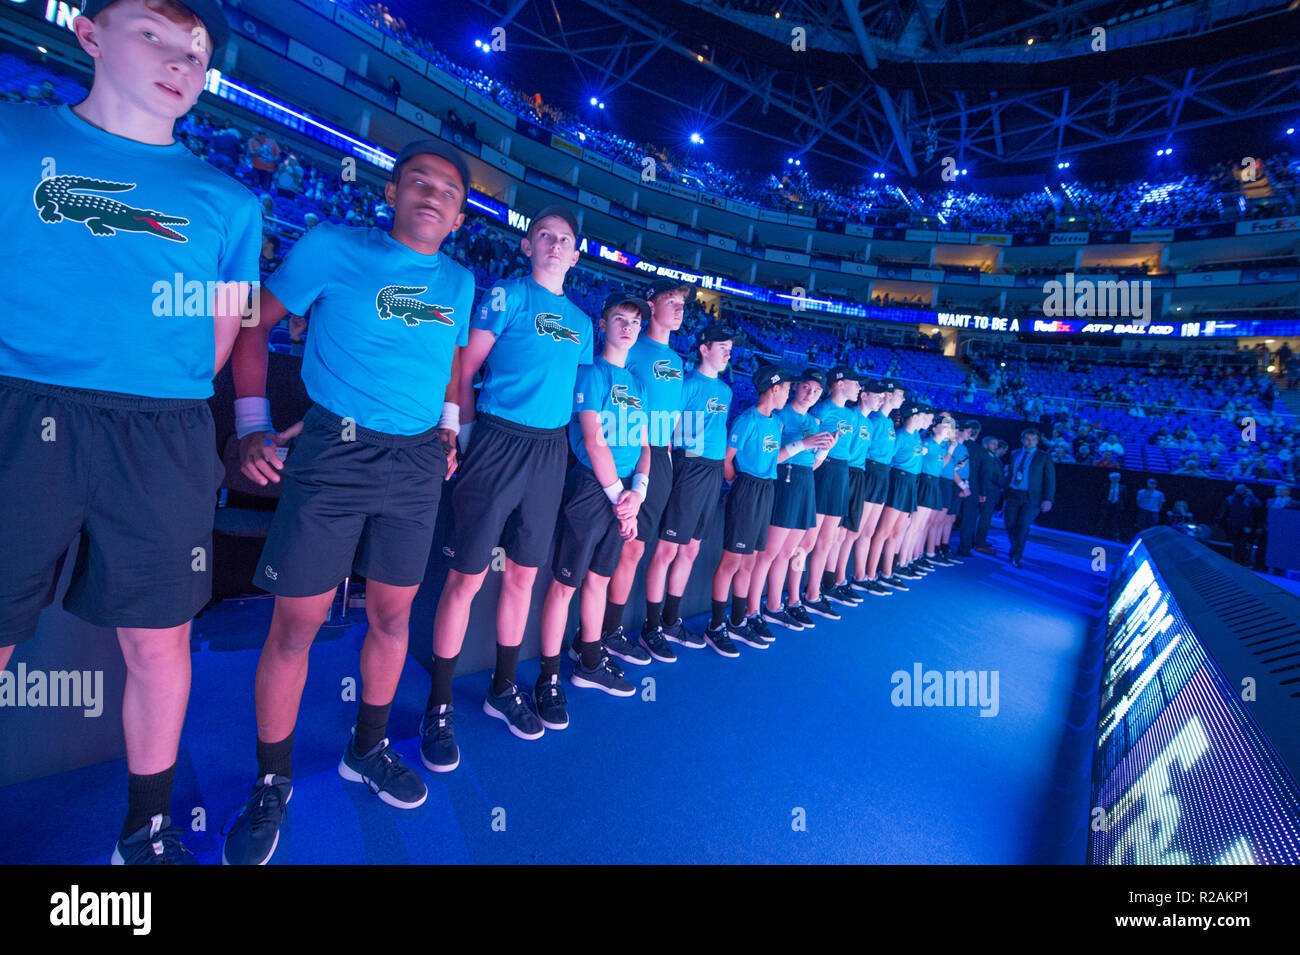 O2, London, UK. 18 November, 2018. Centre court at the O2 gears up for  Finals day of the Nitto ATP Finals 2018. Ball Kids line up to take part in  the Doubles